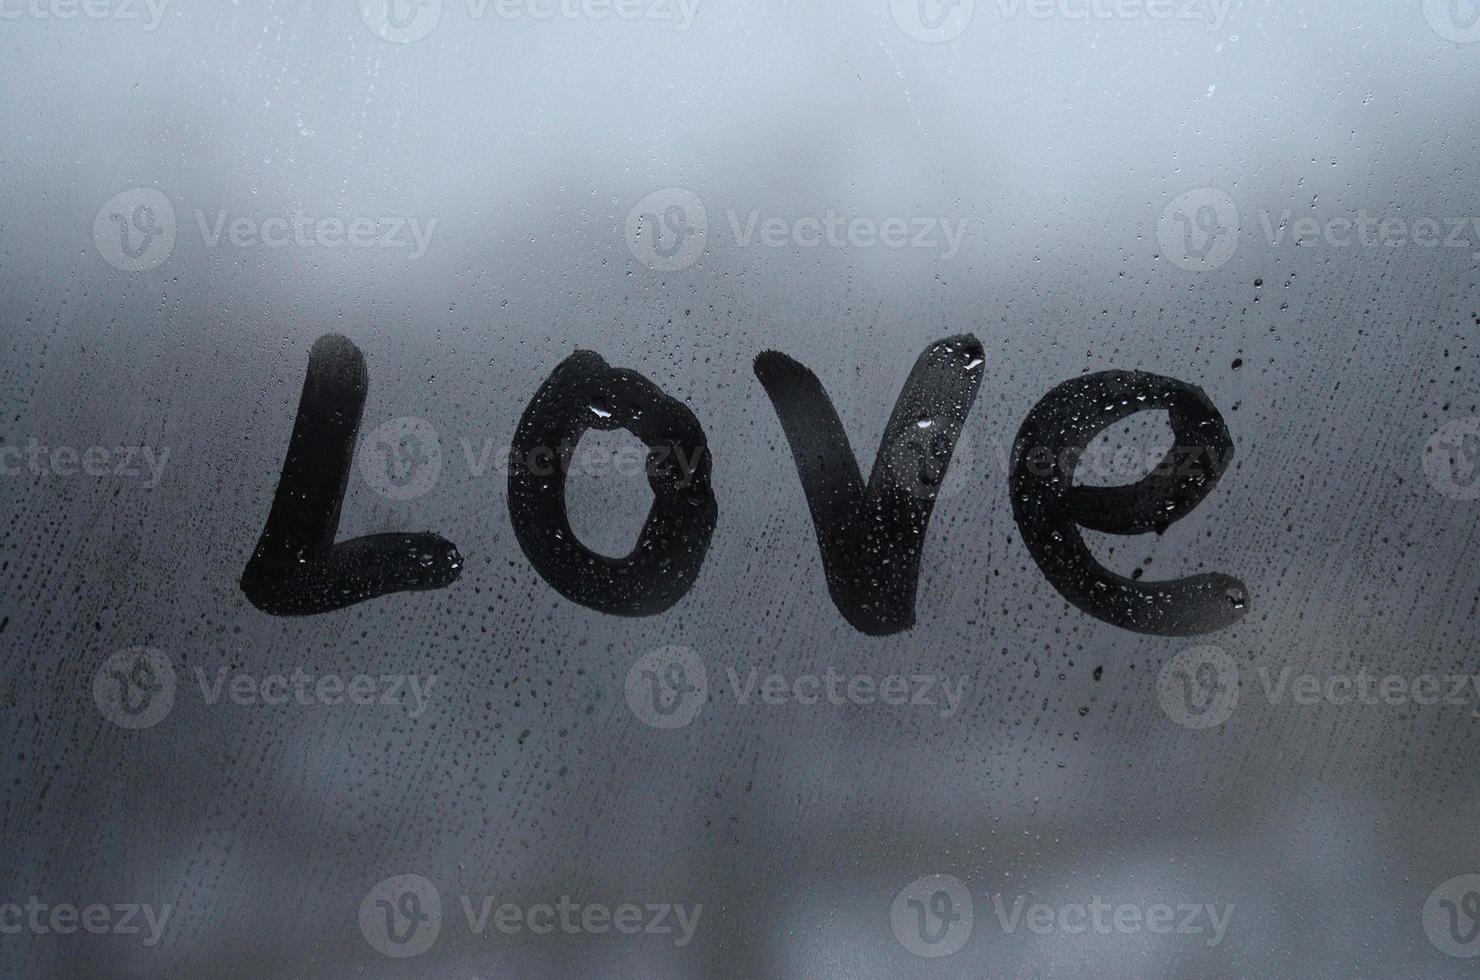 The English word love is written with a finger on the surface of the misted glass. United States of America photo